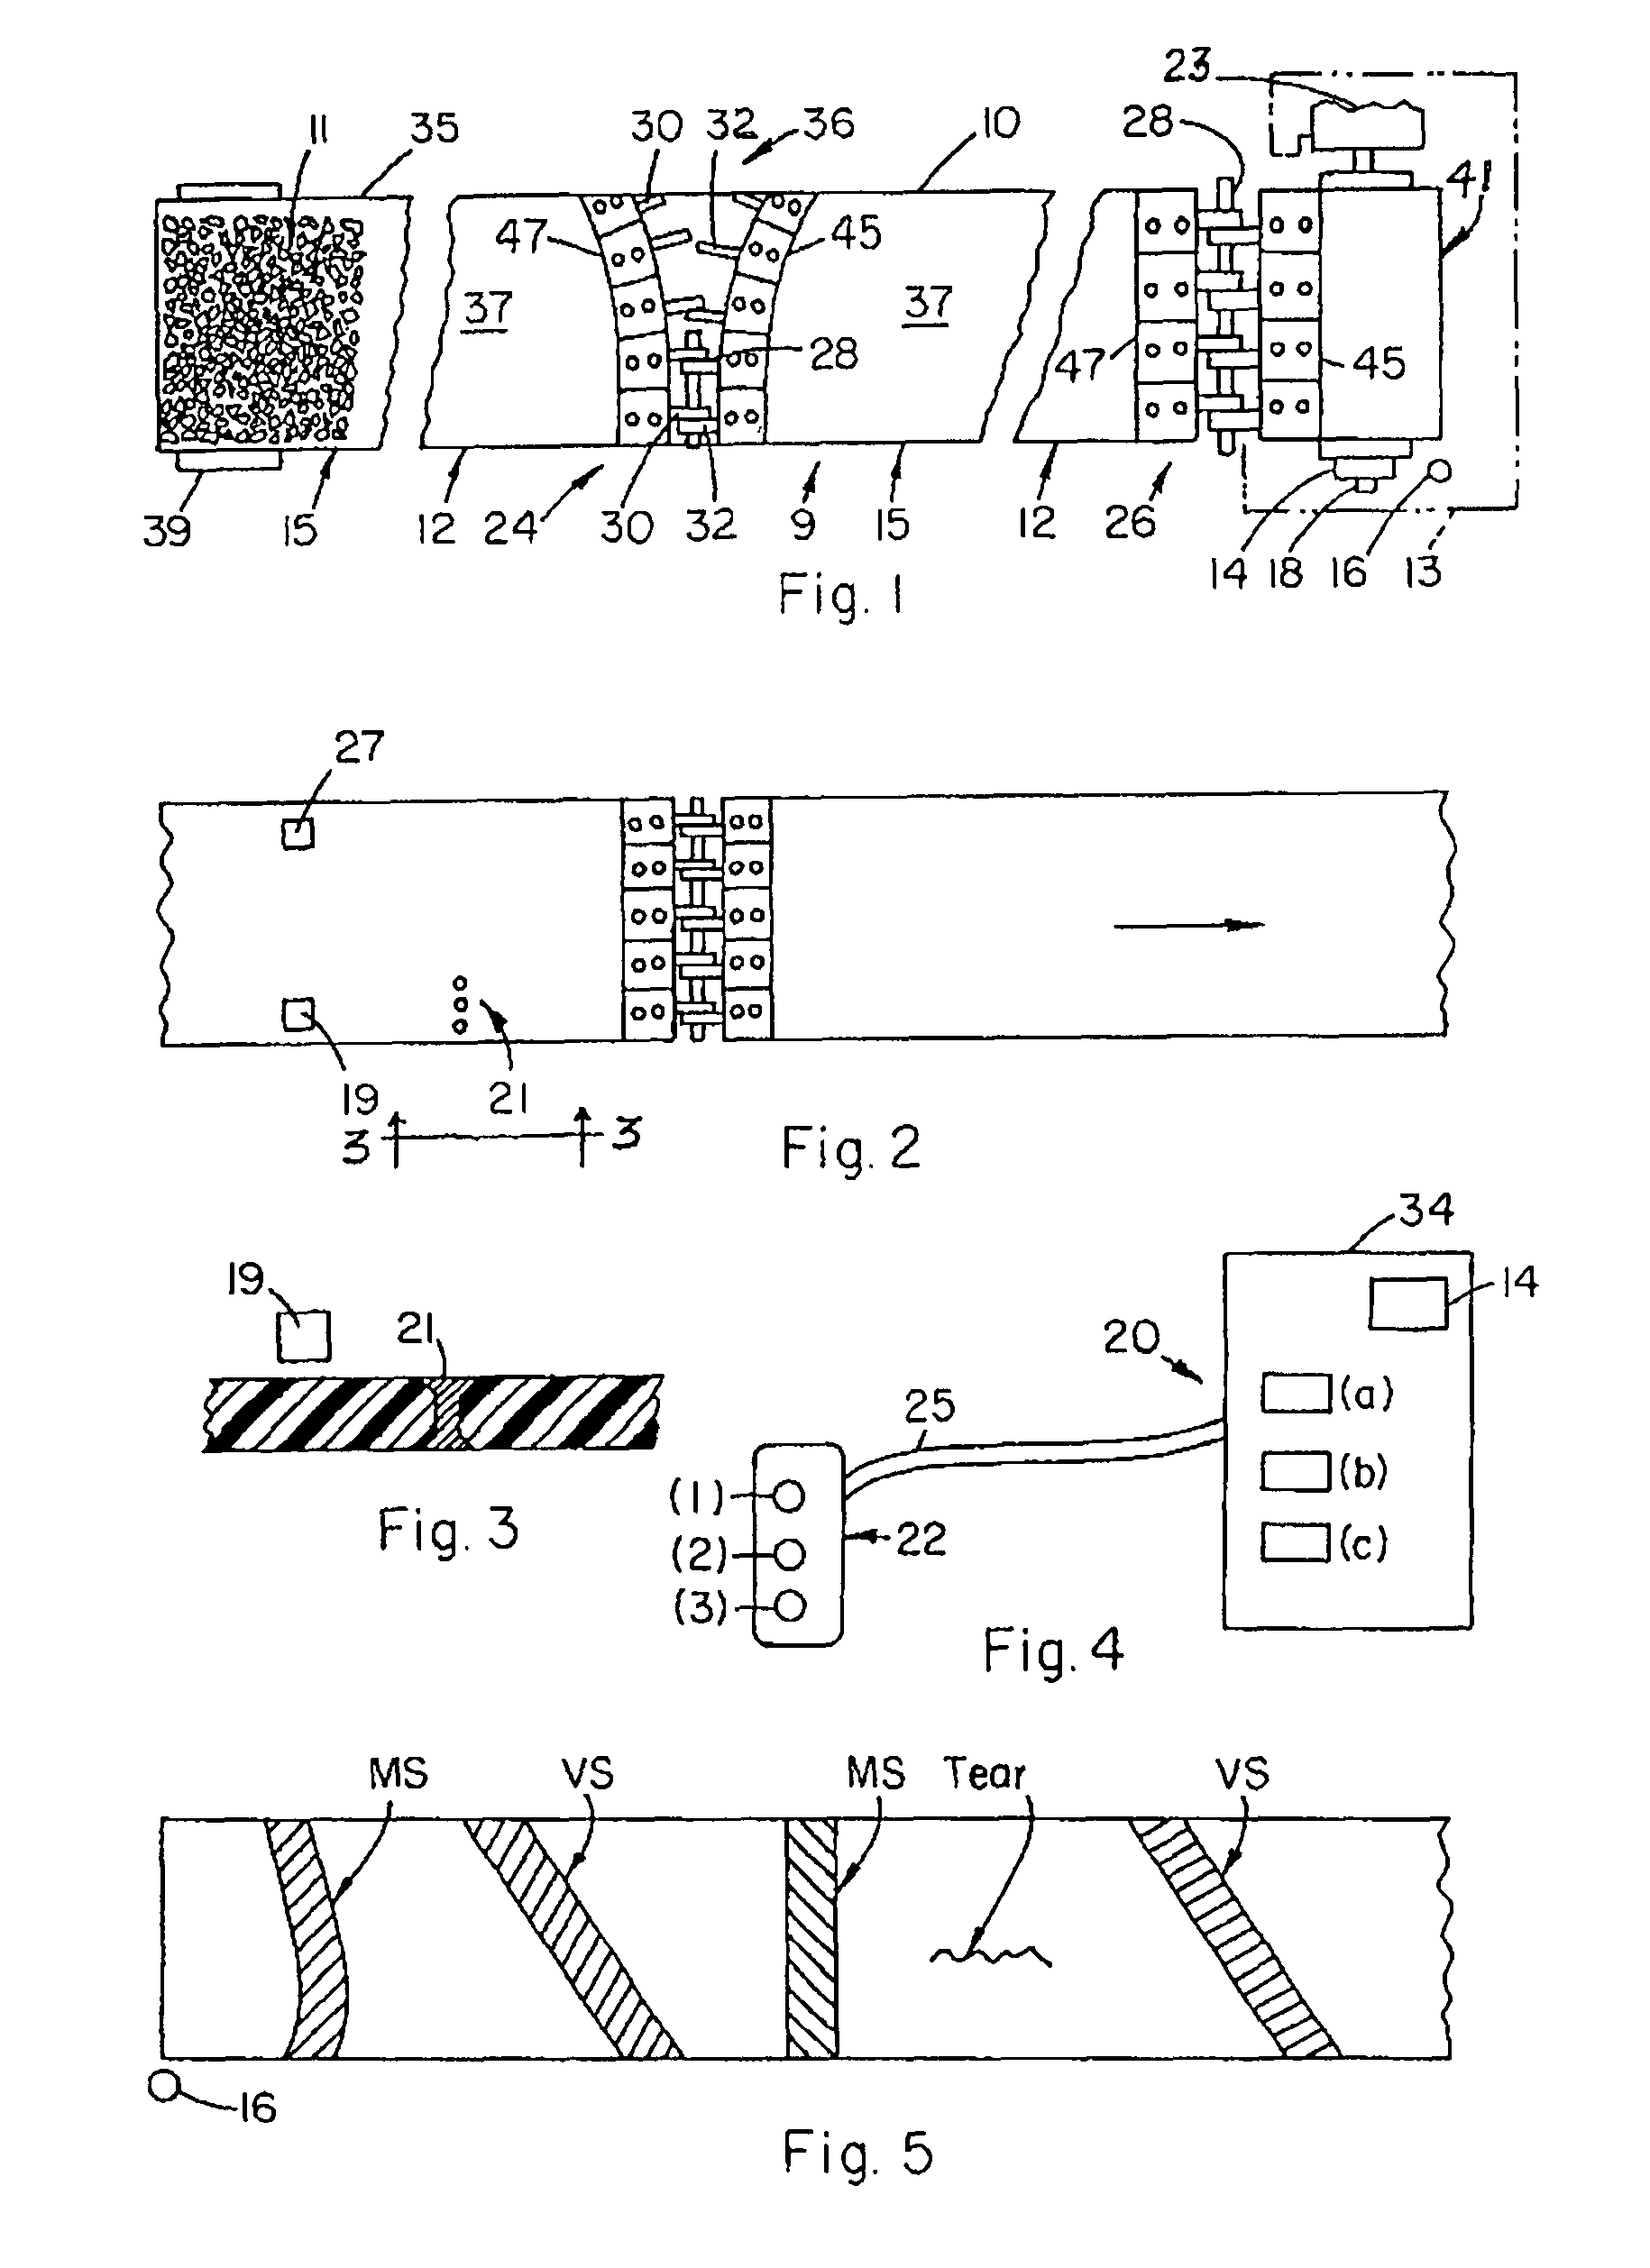 Method and apparatus for monitoring and controlling conveyor position